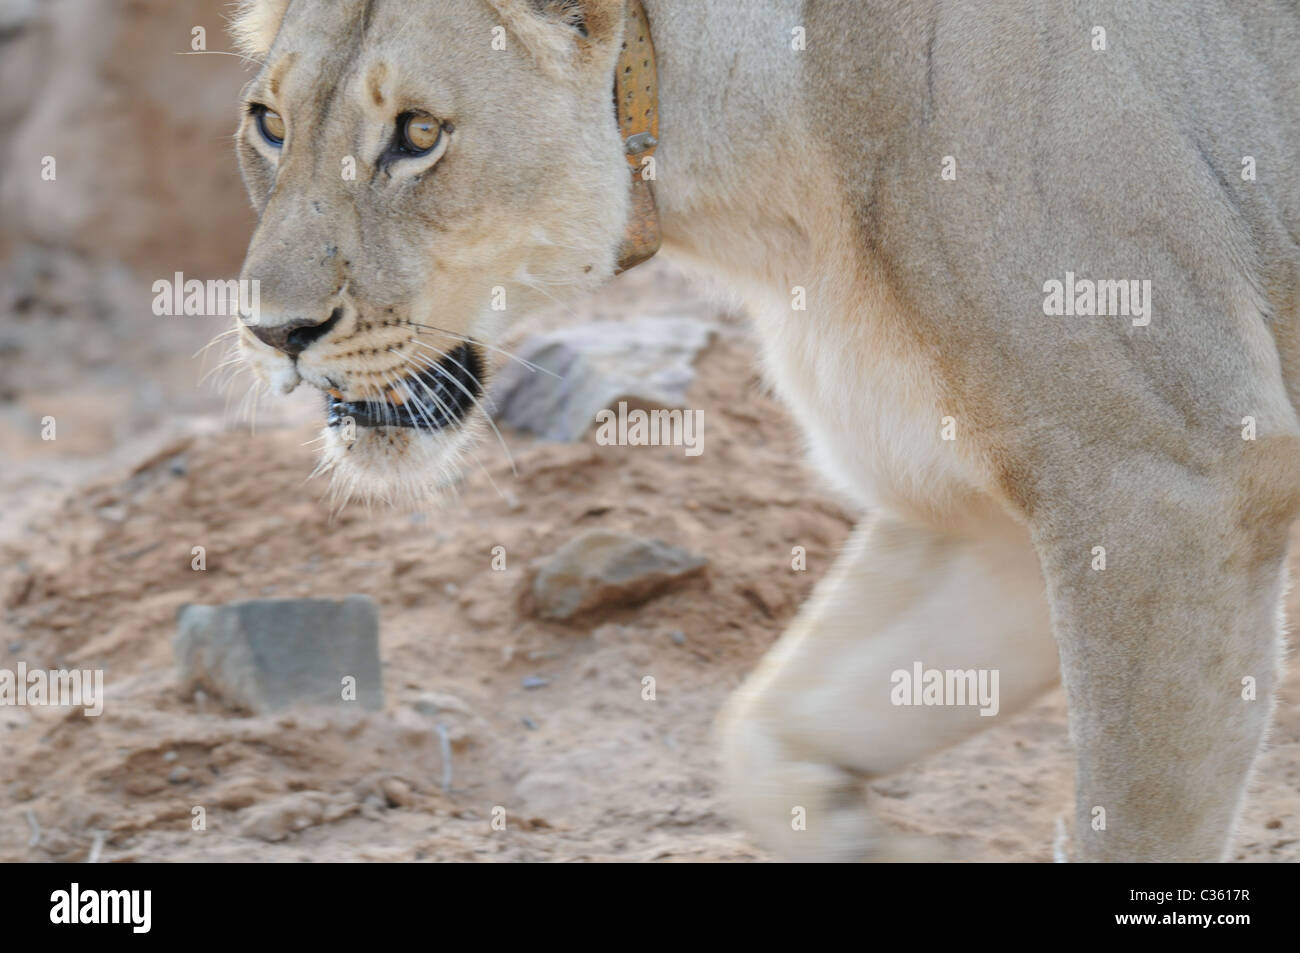 Female lion with a radio transmitter Stock Photo